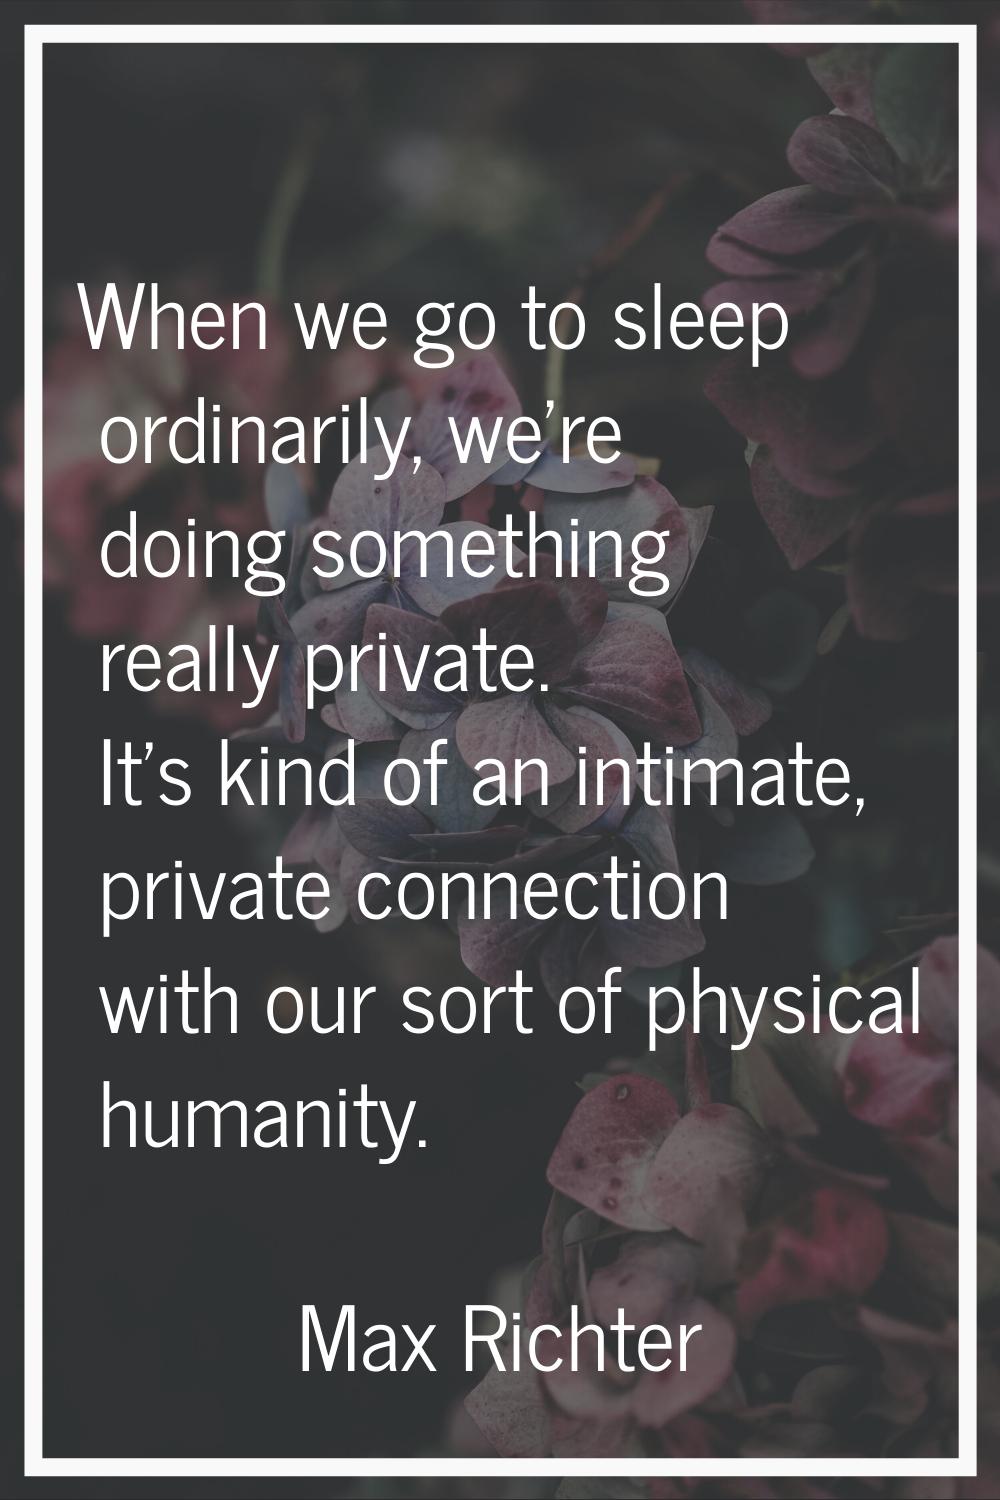 When we go to sleep ordinarily, we're doing something really private. It's kind of an intimate, pri